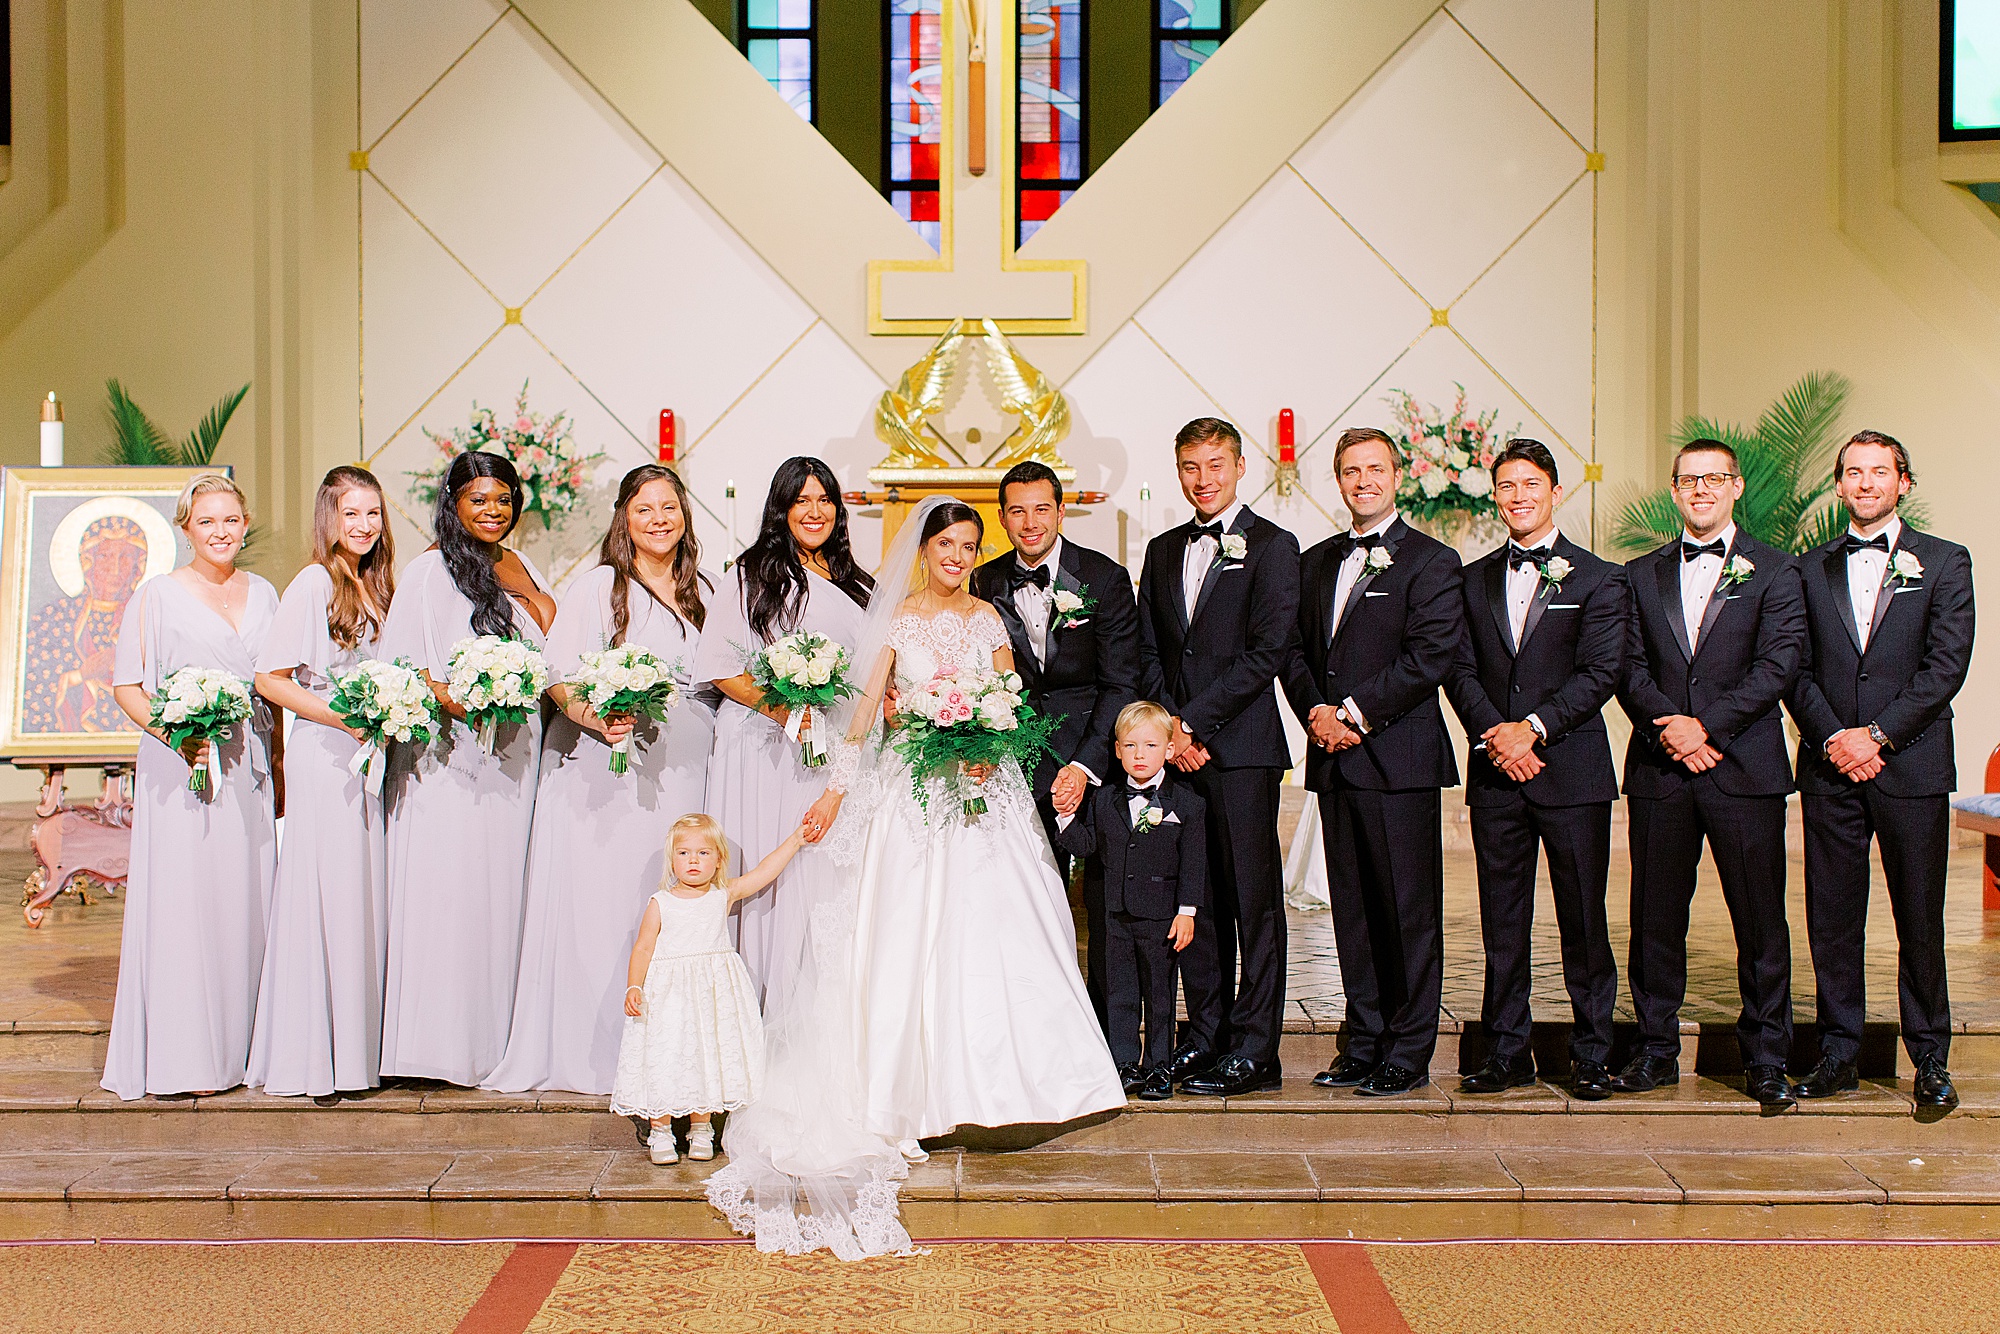 bride and groom pose with wedding party in church